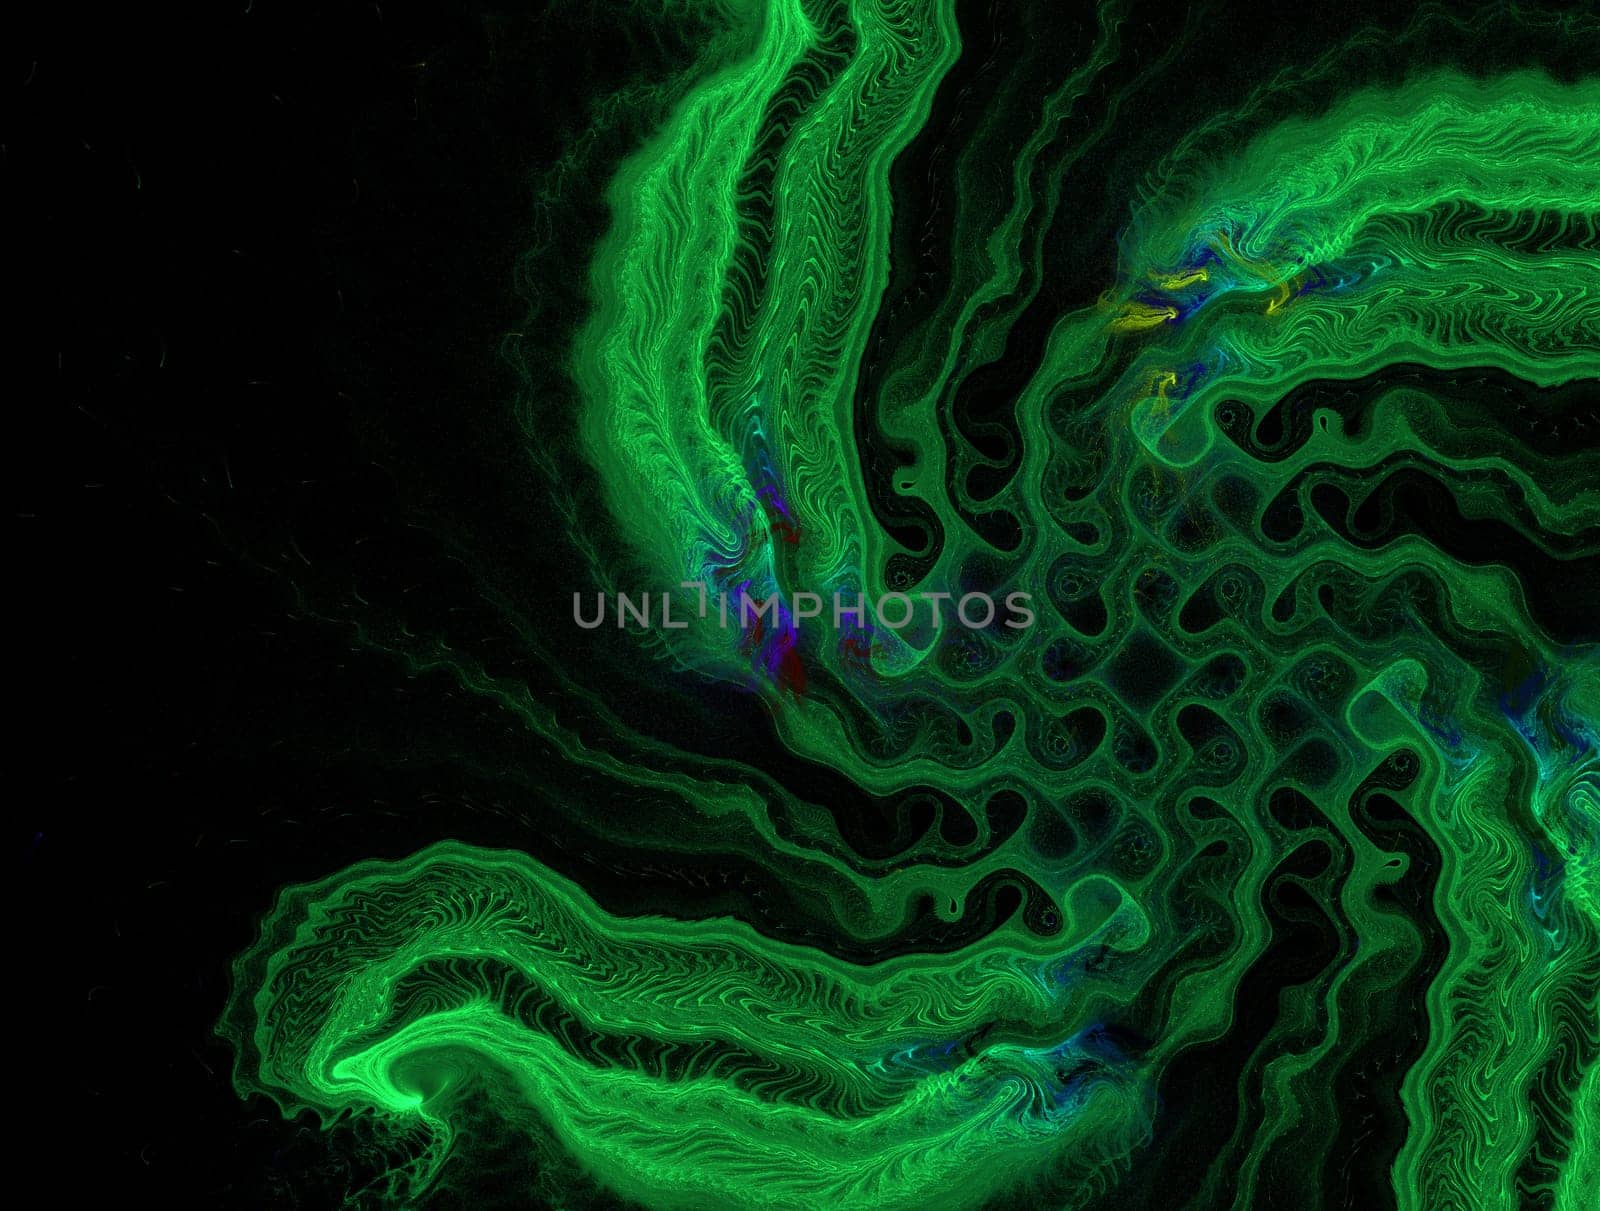 Imaginatory lush fractal texture image abstract background